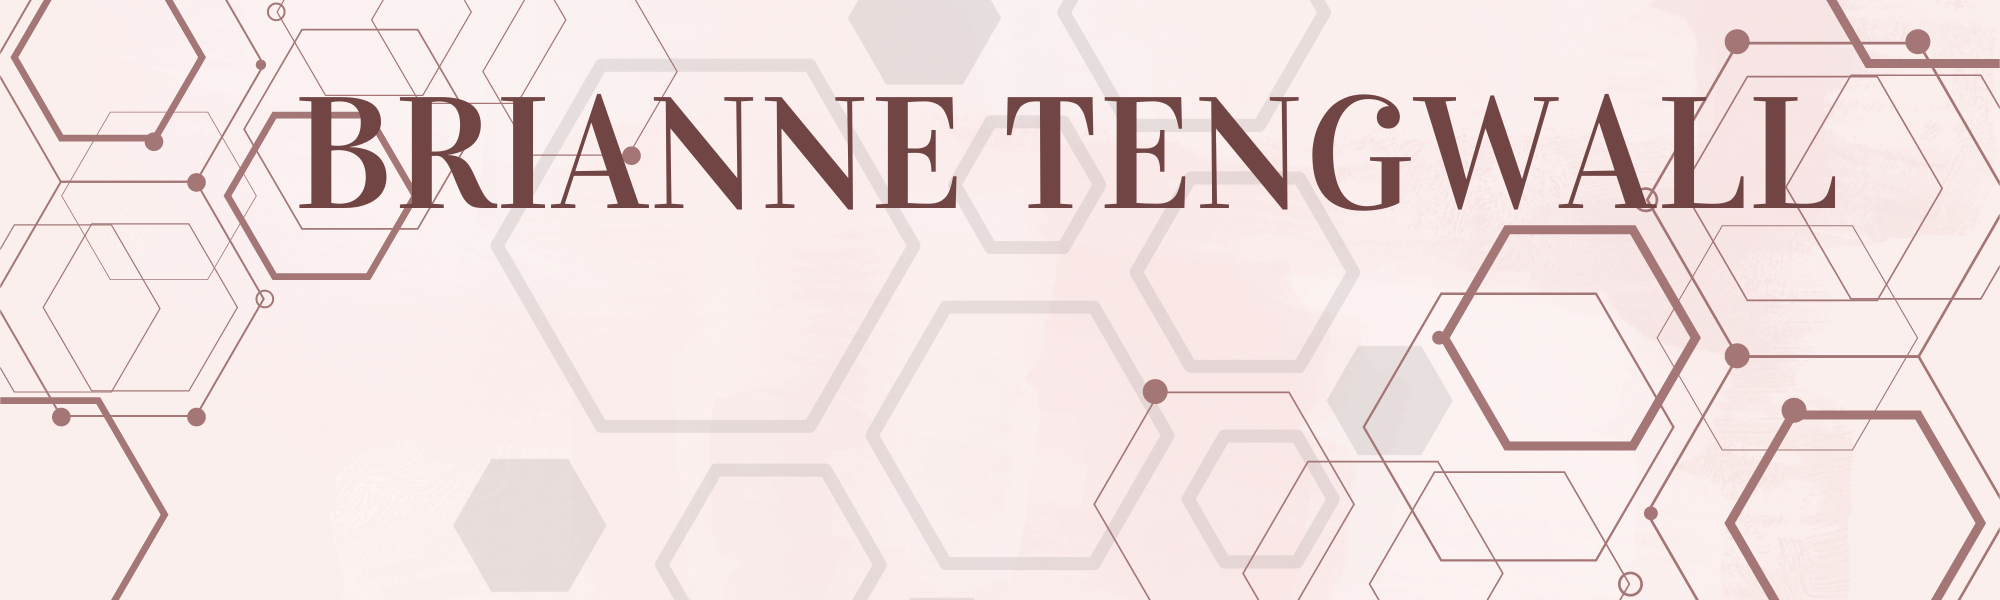 pink and brown hexagon pattern background title image with name Brianne Tengwall in text